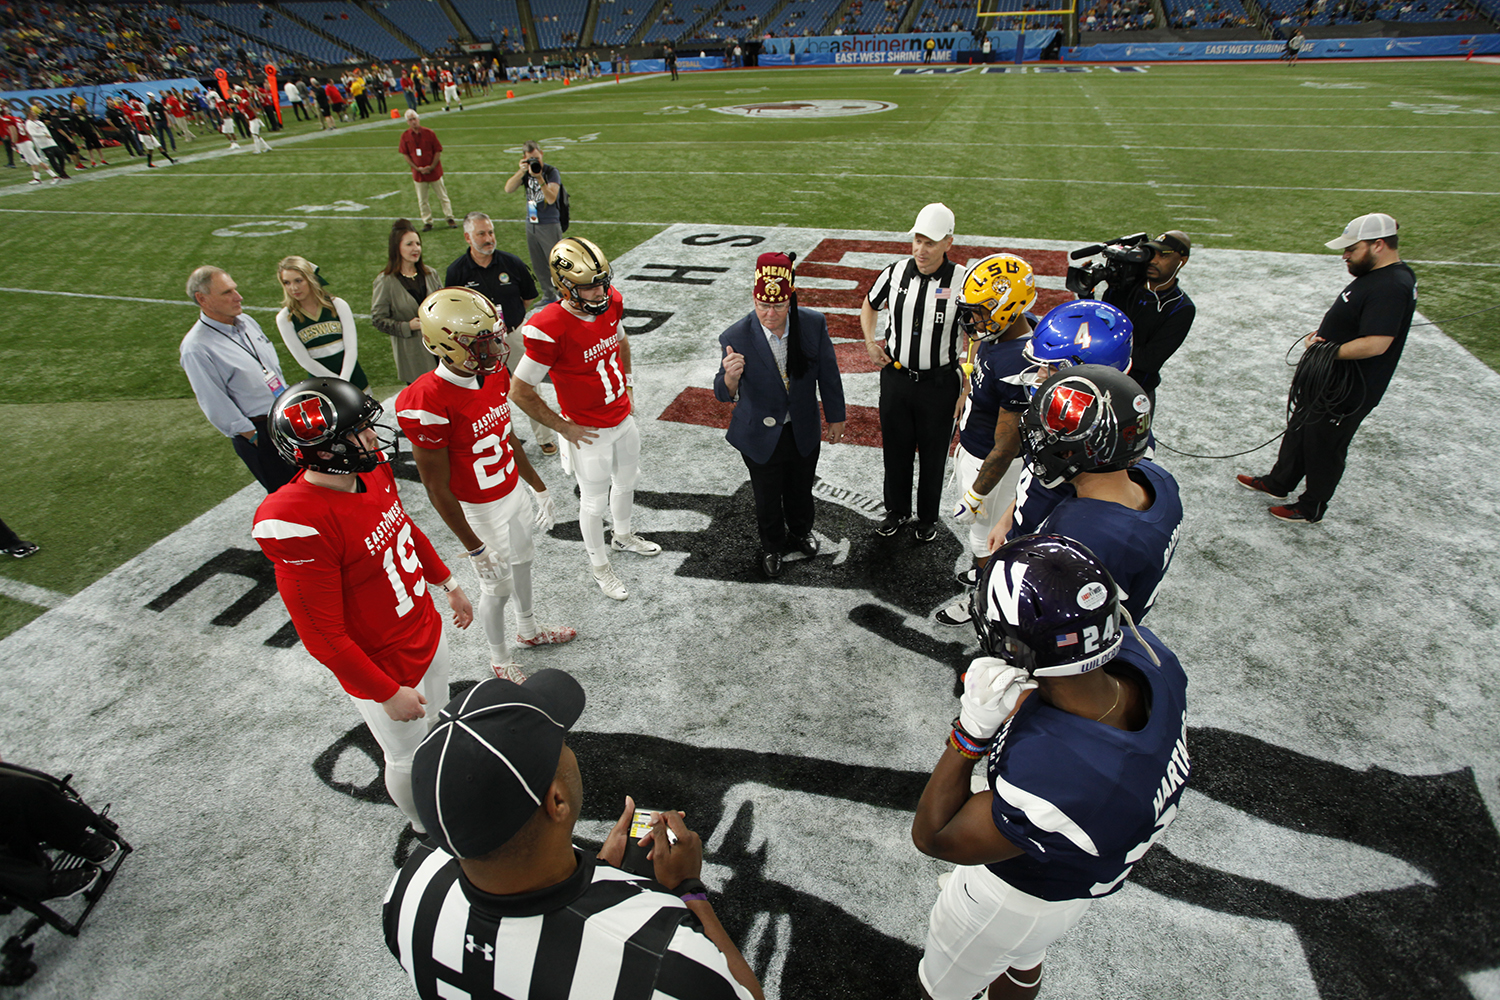 Team captains meet for the coin toss for the East-West Shrine Game. Flipping the coin is Imperial Potentate, Jim Cain.